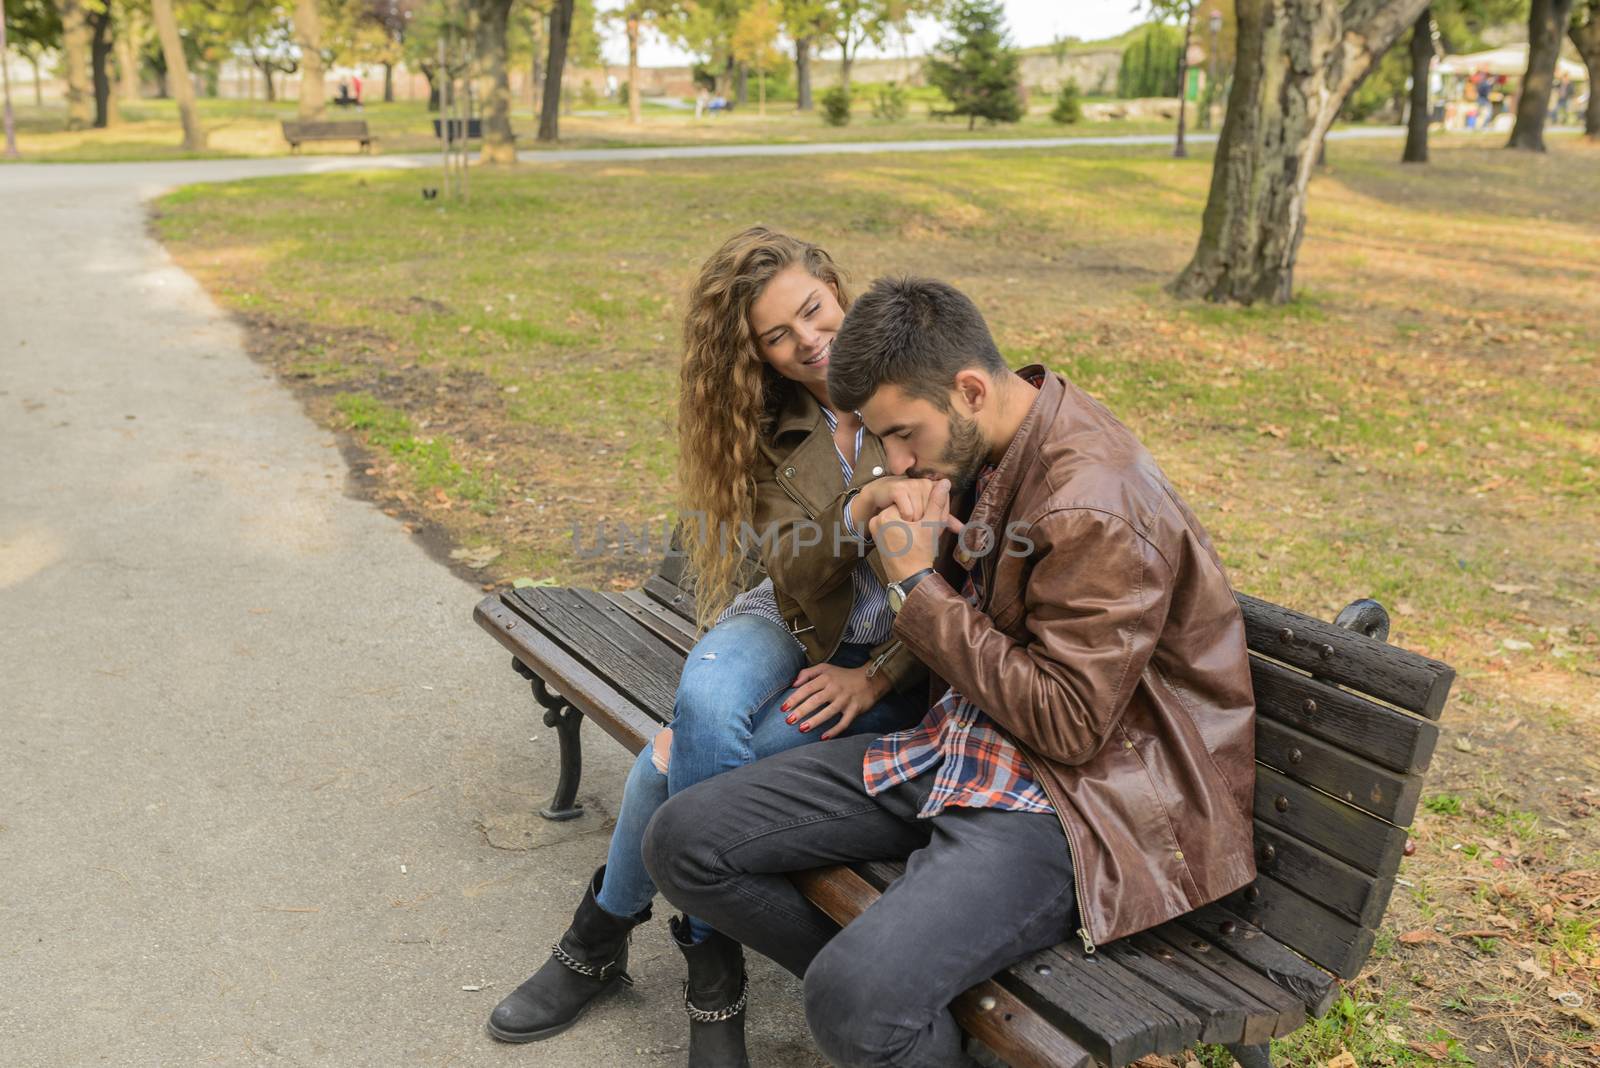 Handsome young man is kissing his girlfriends hand. Romantic moment